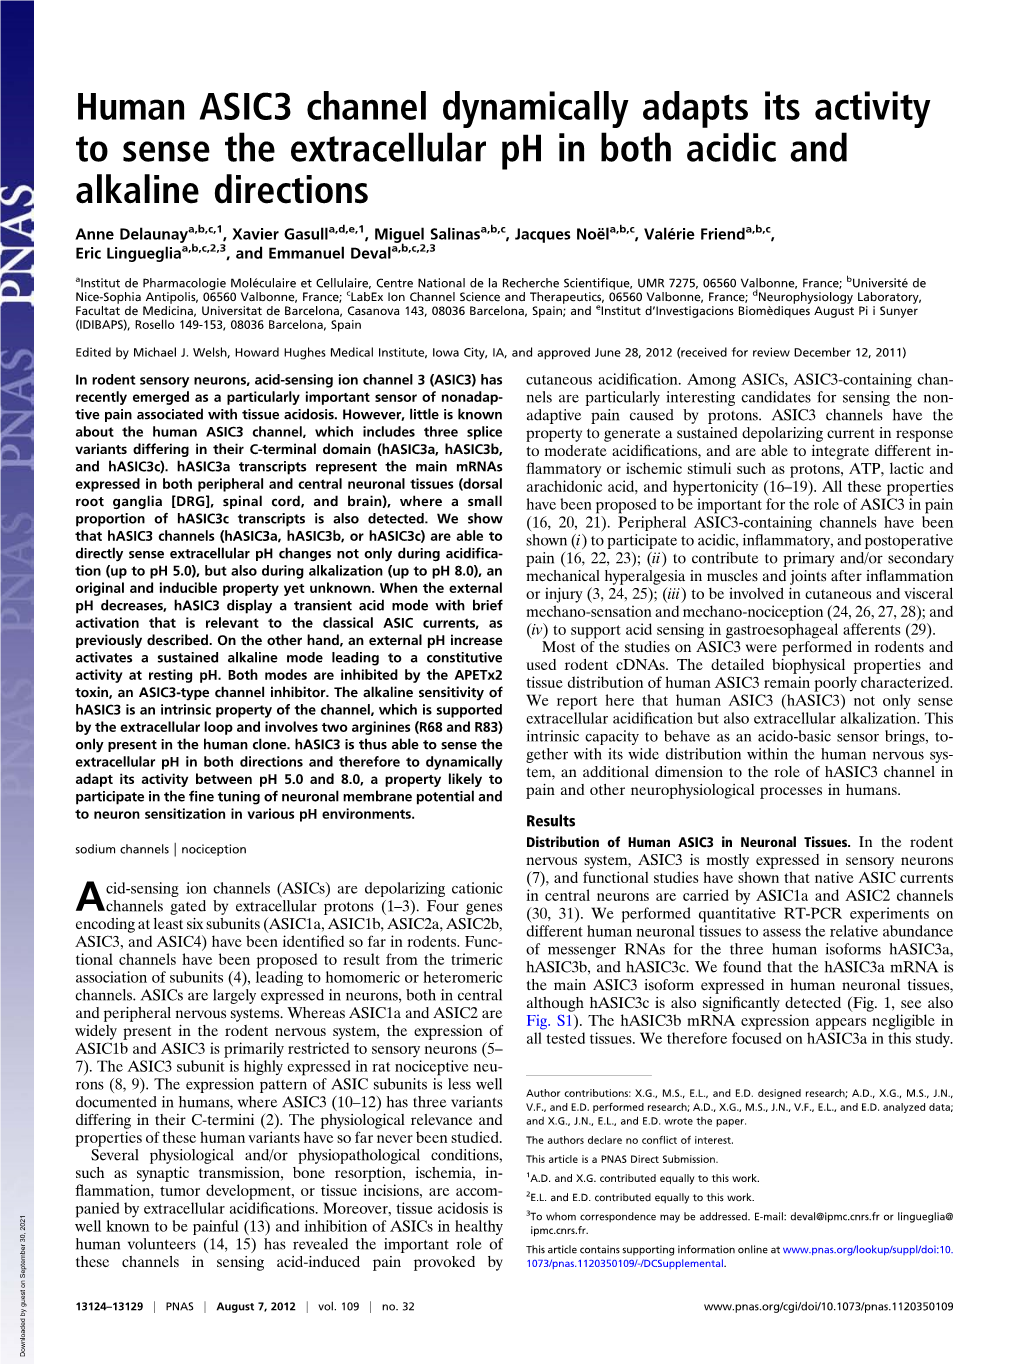 Human ASIC3 Channel Dynamically Adapts Its Activity to Sense the Extracellular Ph in Both Acidic and Alkaline Directions